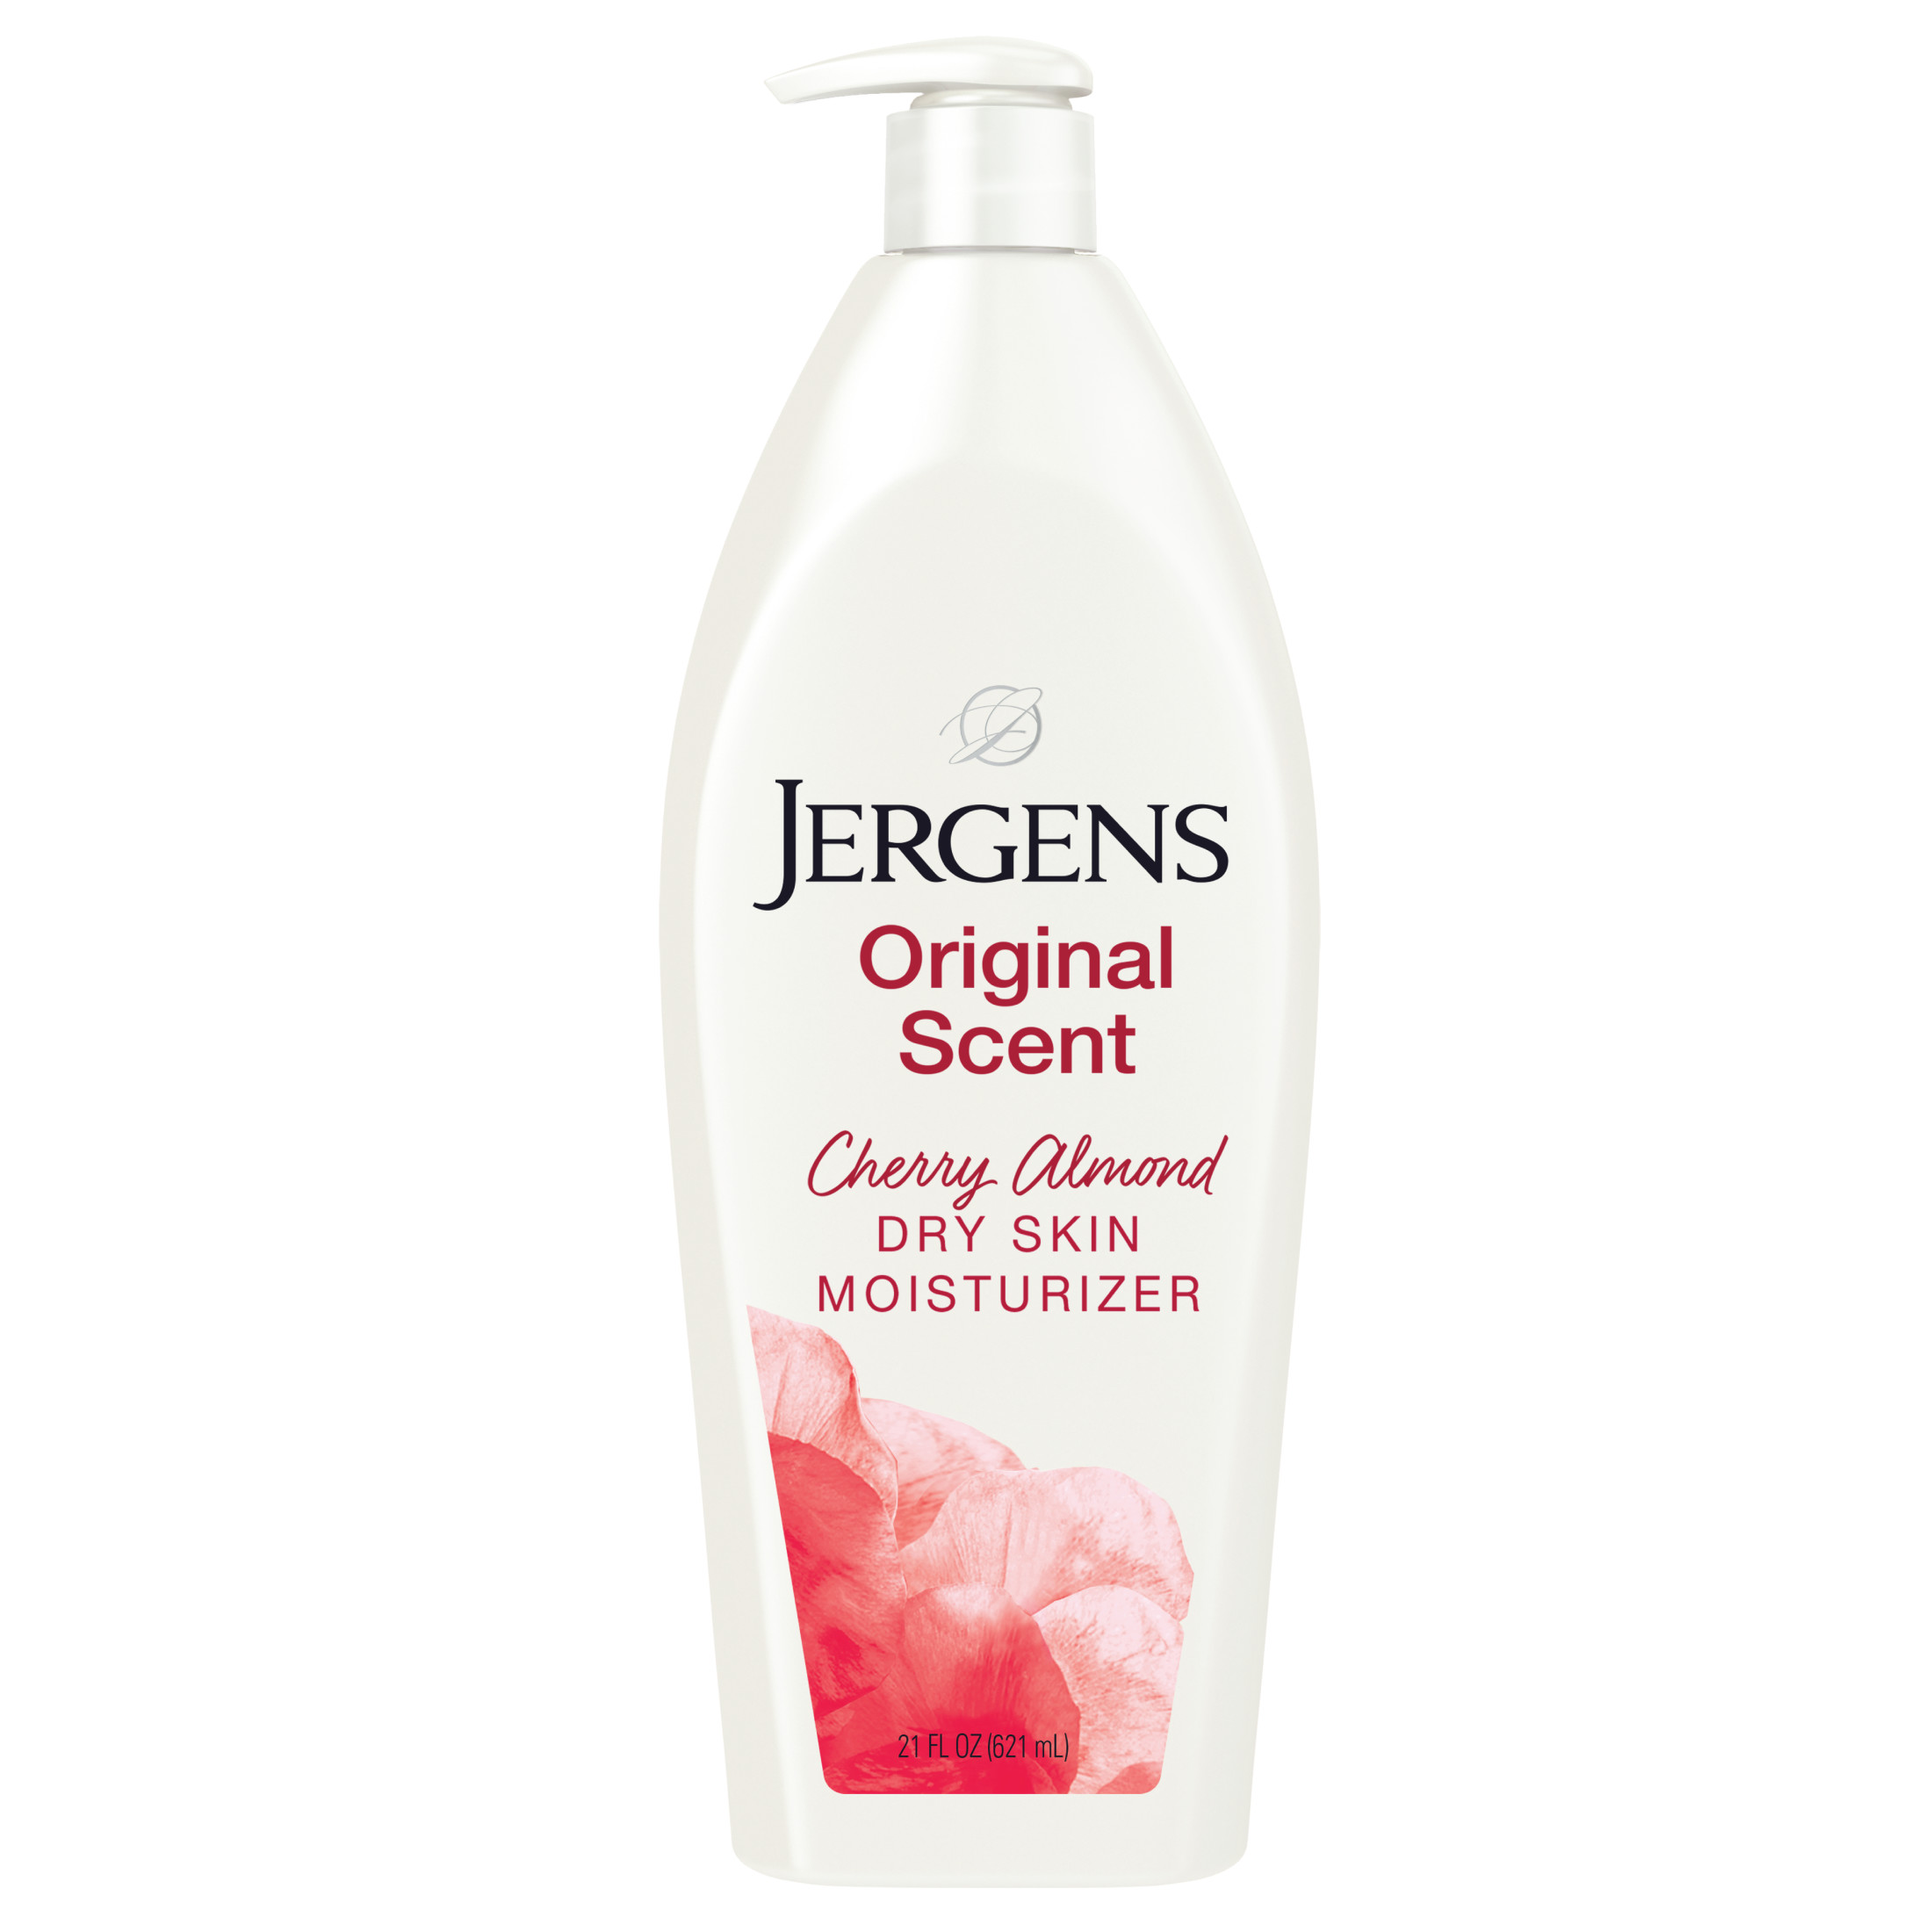 Jergens Original Scent With Cherry Almond Essence Dry Skin Lotion, 21 Oz - image 1 of 12